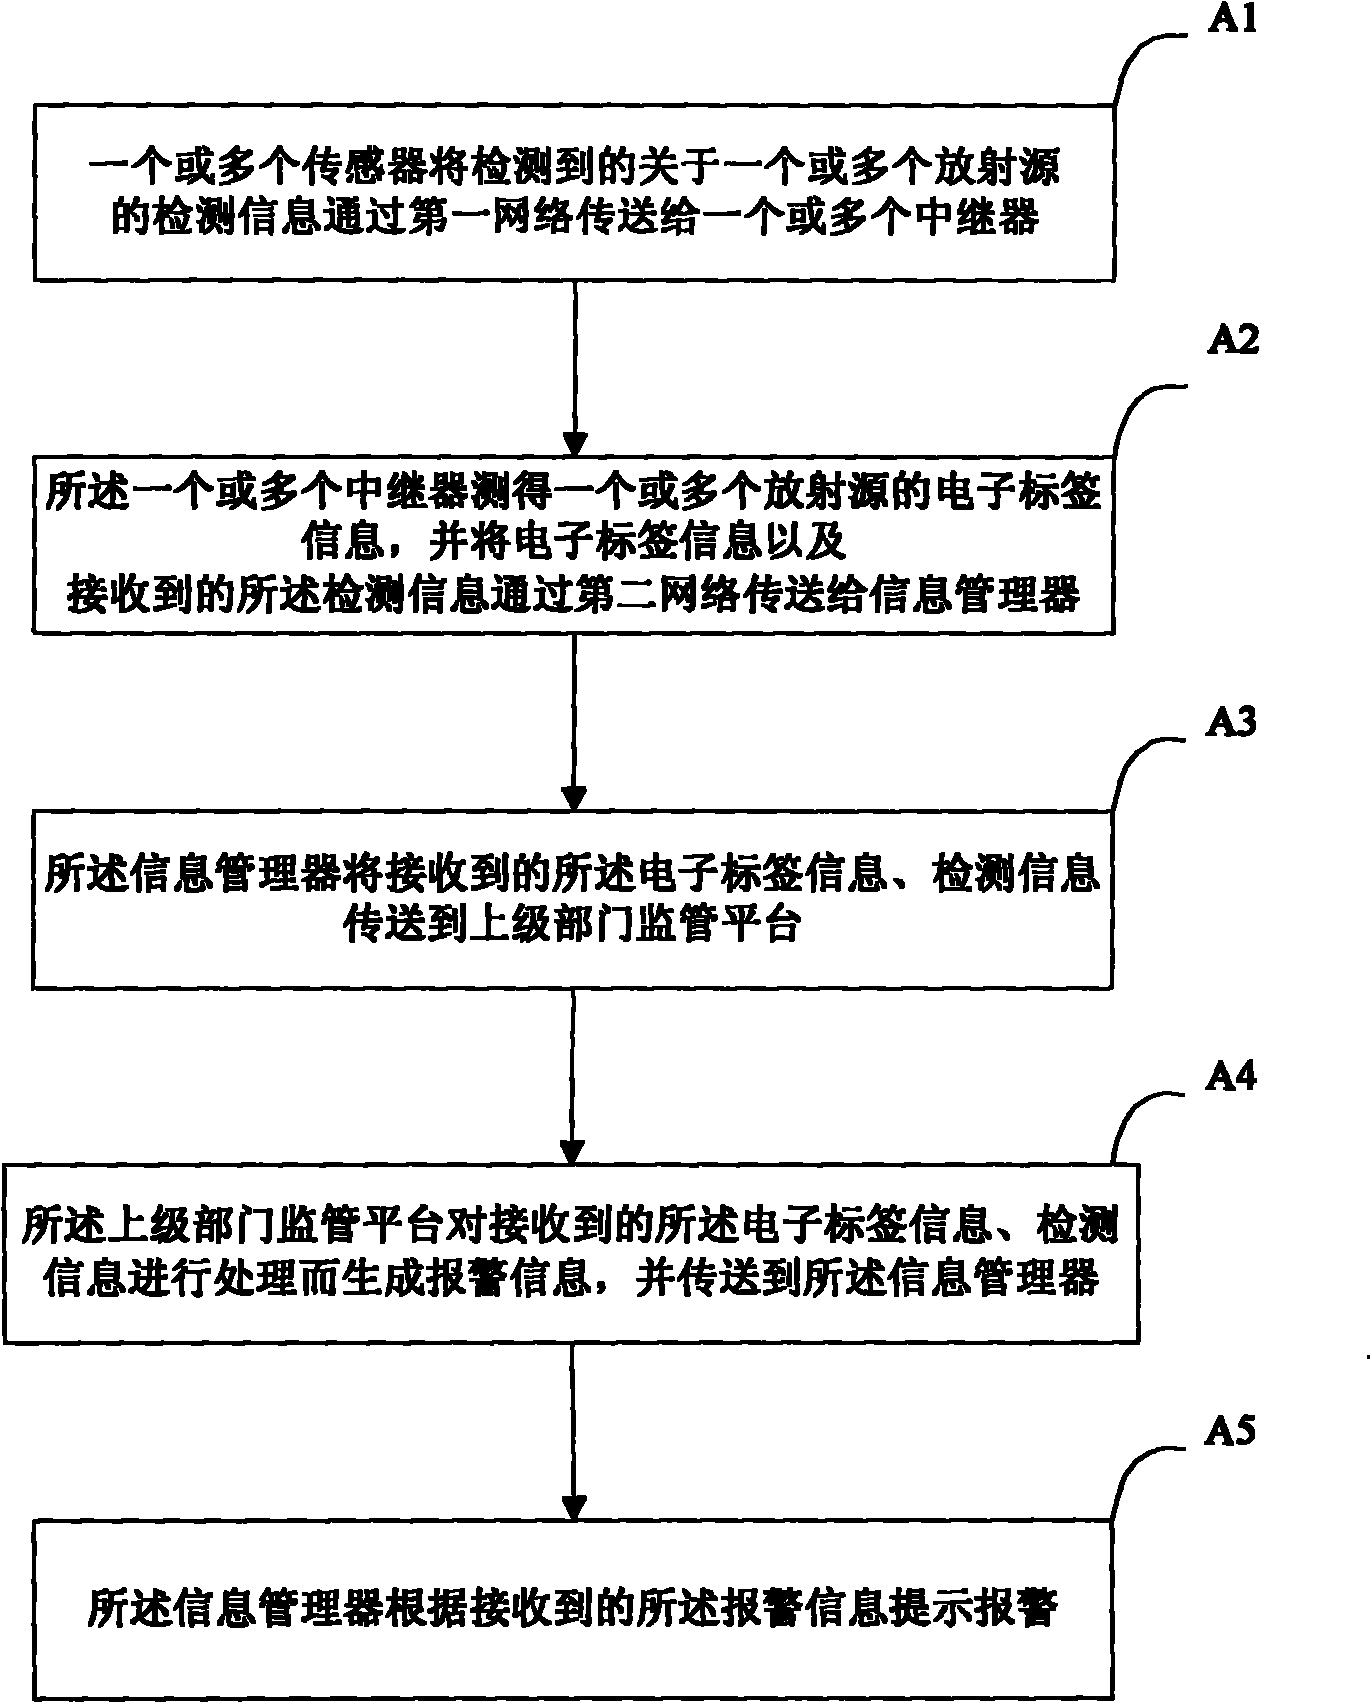 Radioactive source supervision system and method